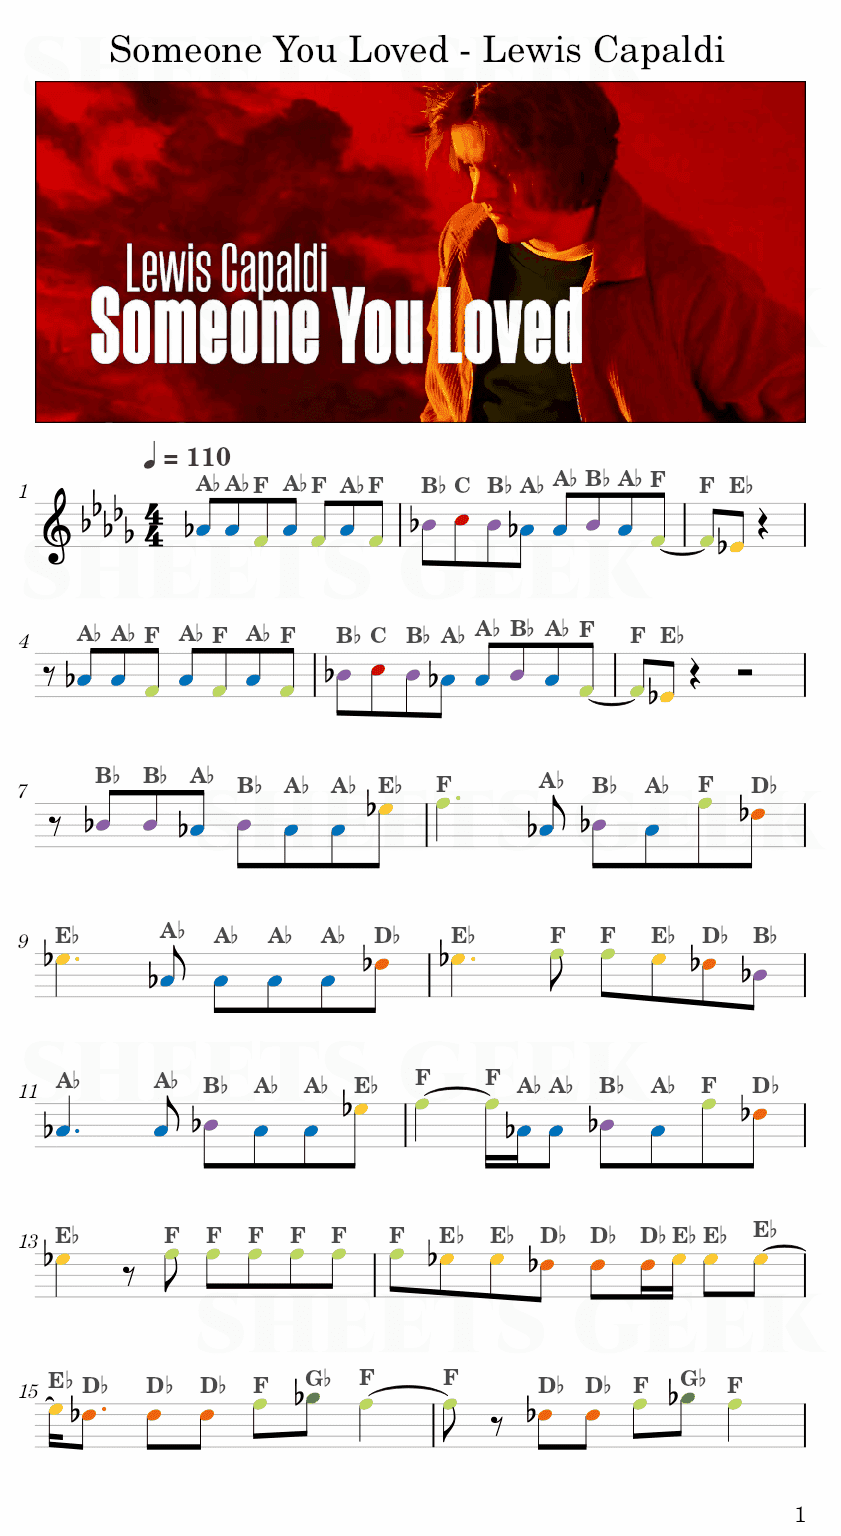 Someone You Loved - Lewis Capaldi Easy Sheet Music Free for piano, keyboard, flute, violin, sax, cello page 1